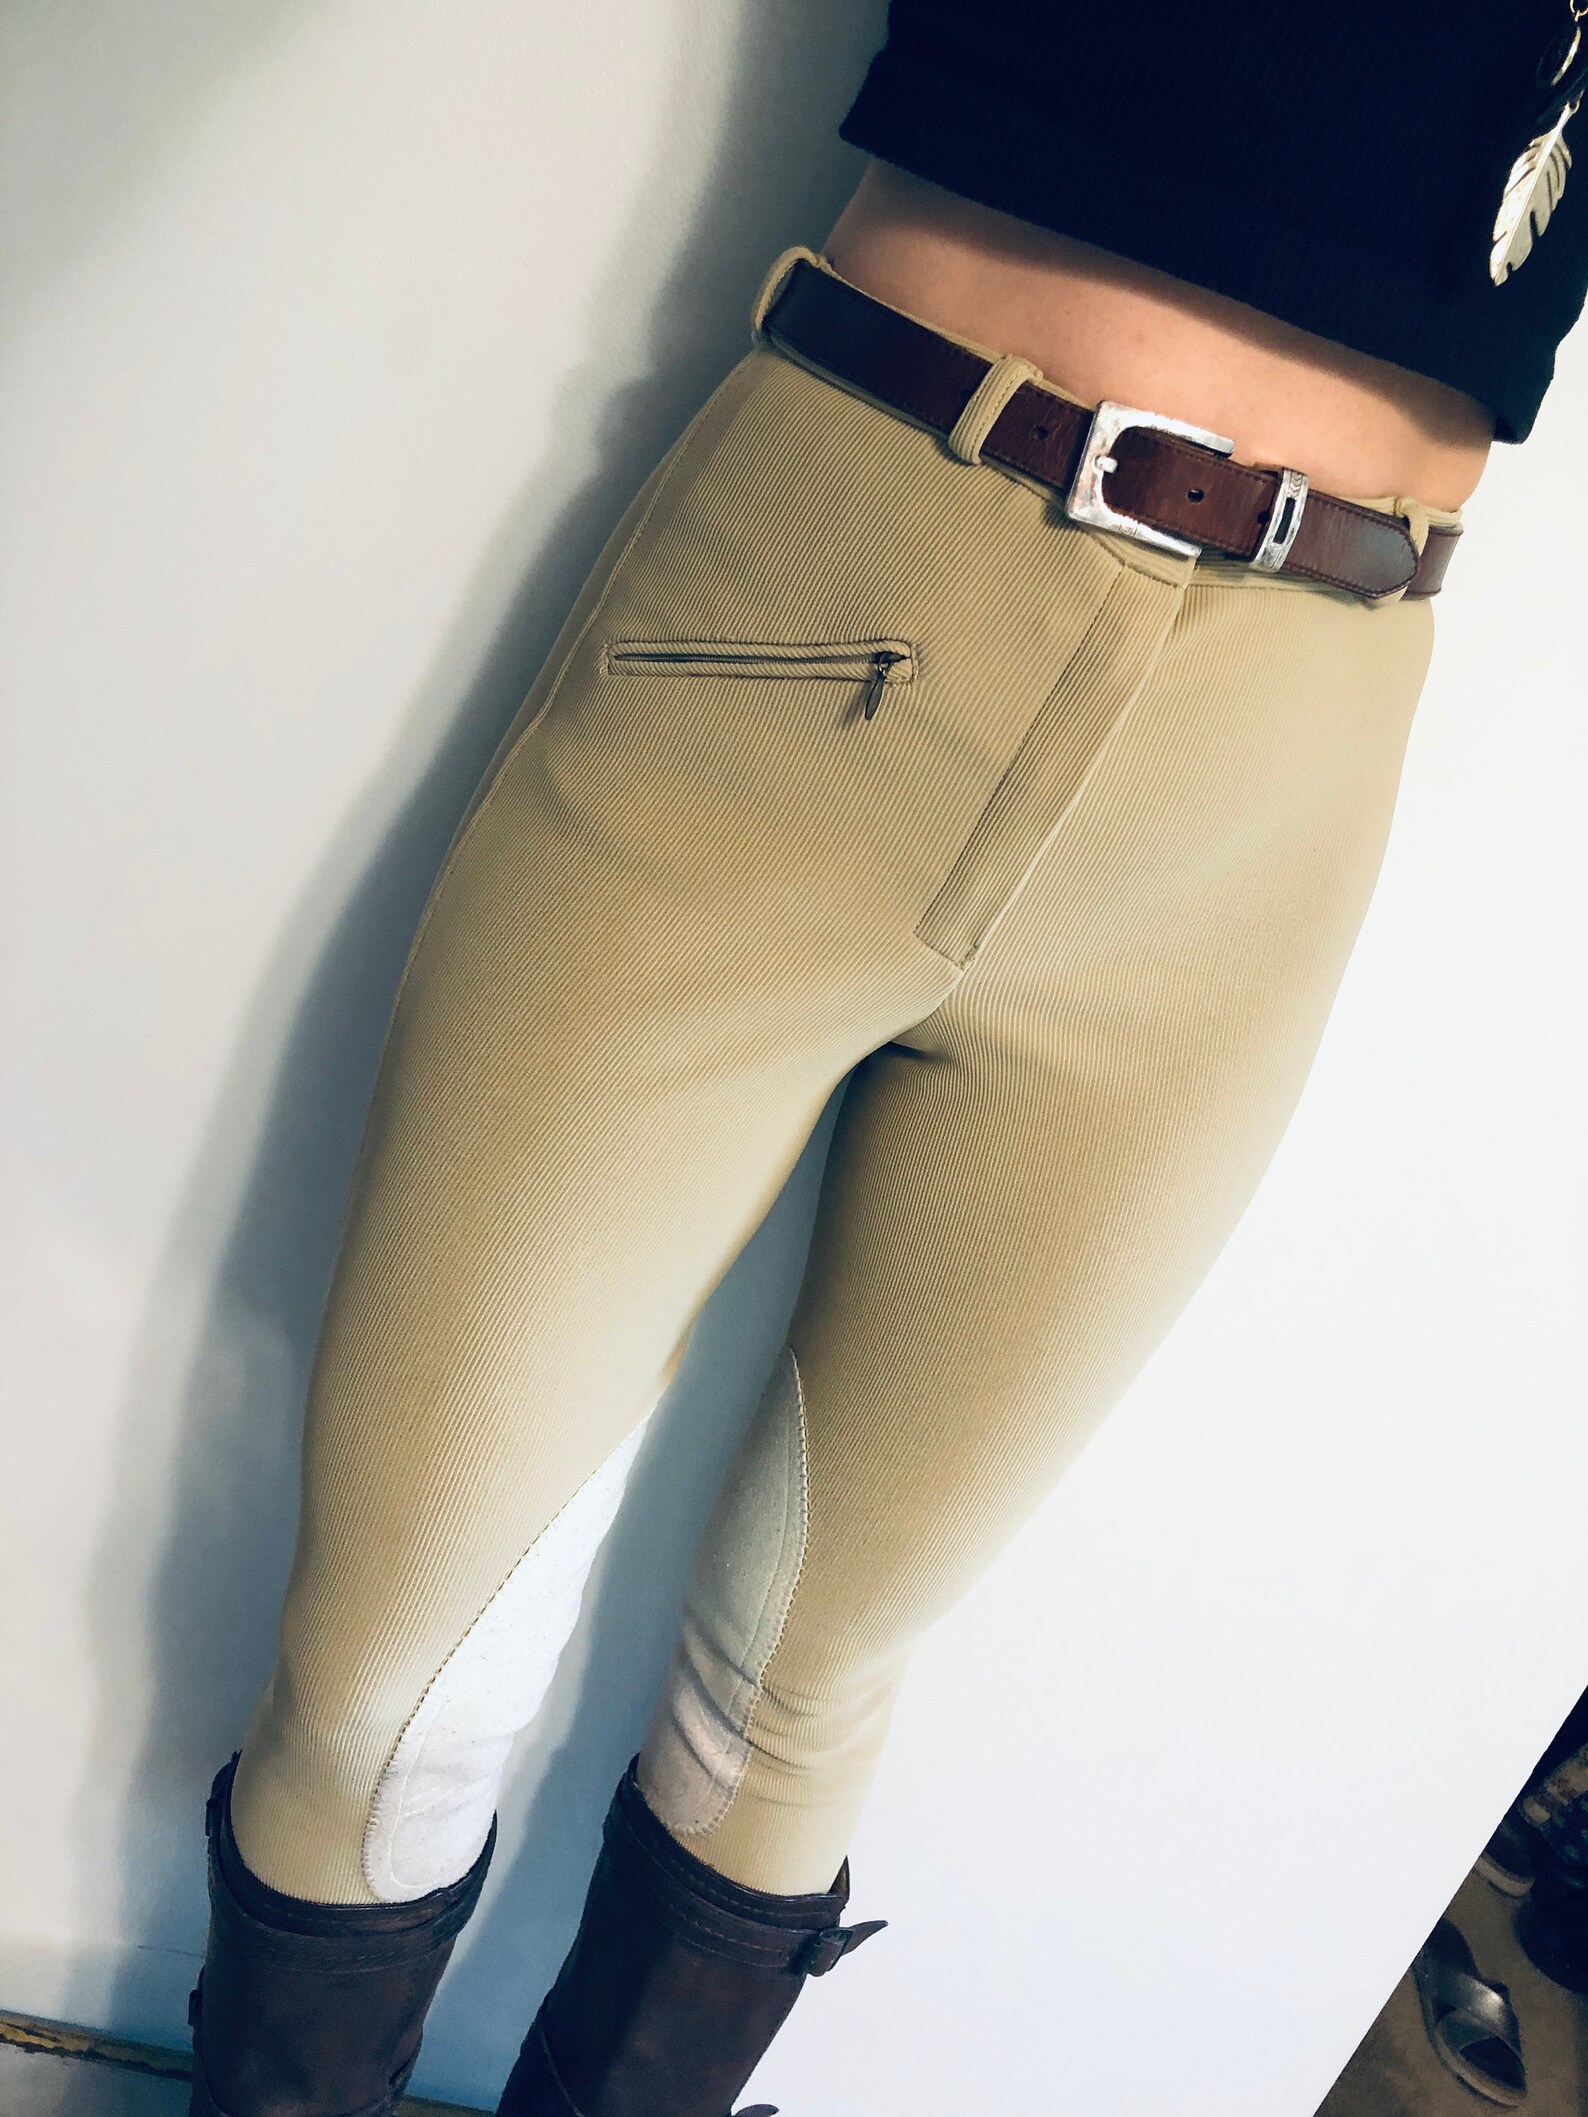 Vintage Riding Breeches W Leather Patches Jc Penneys Dressage Etsy